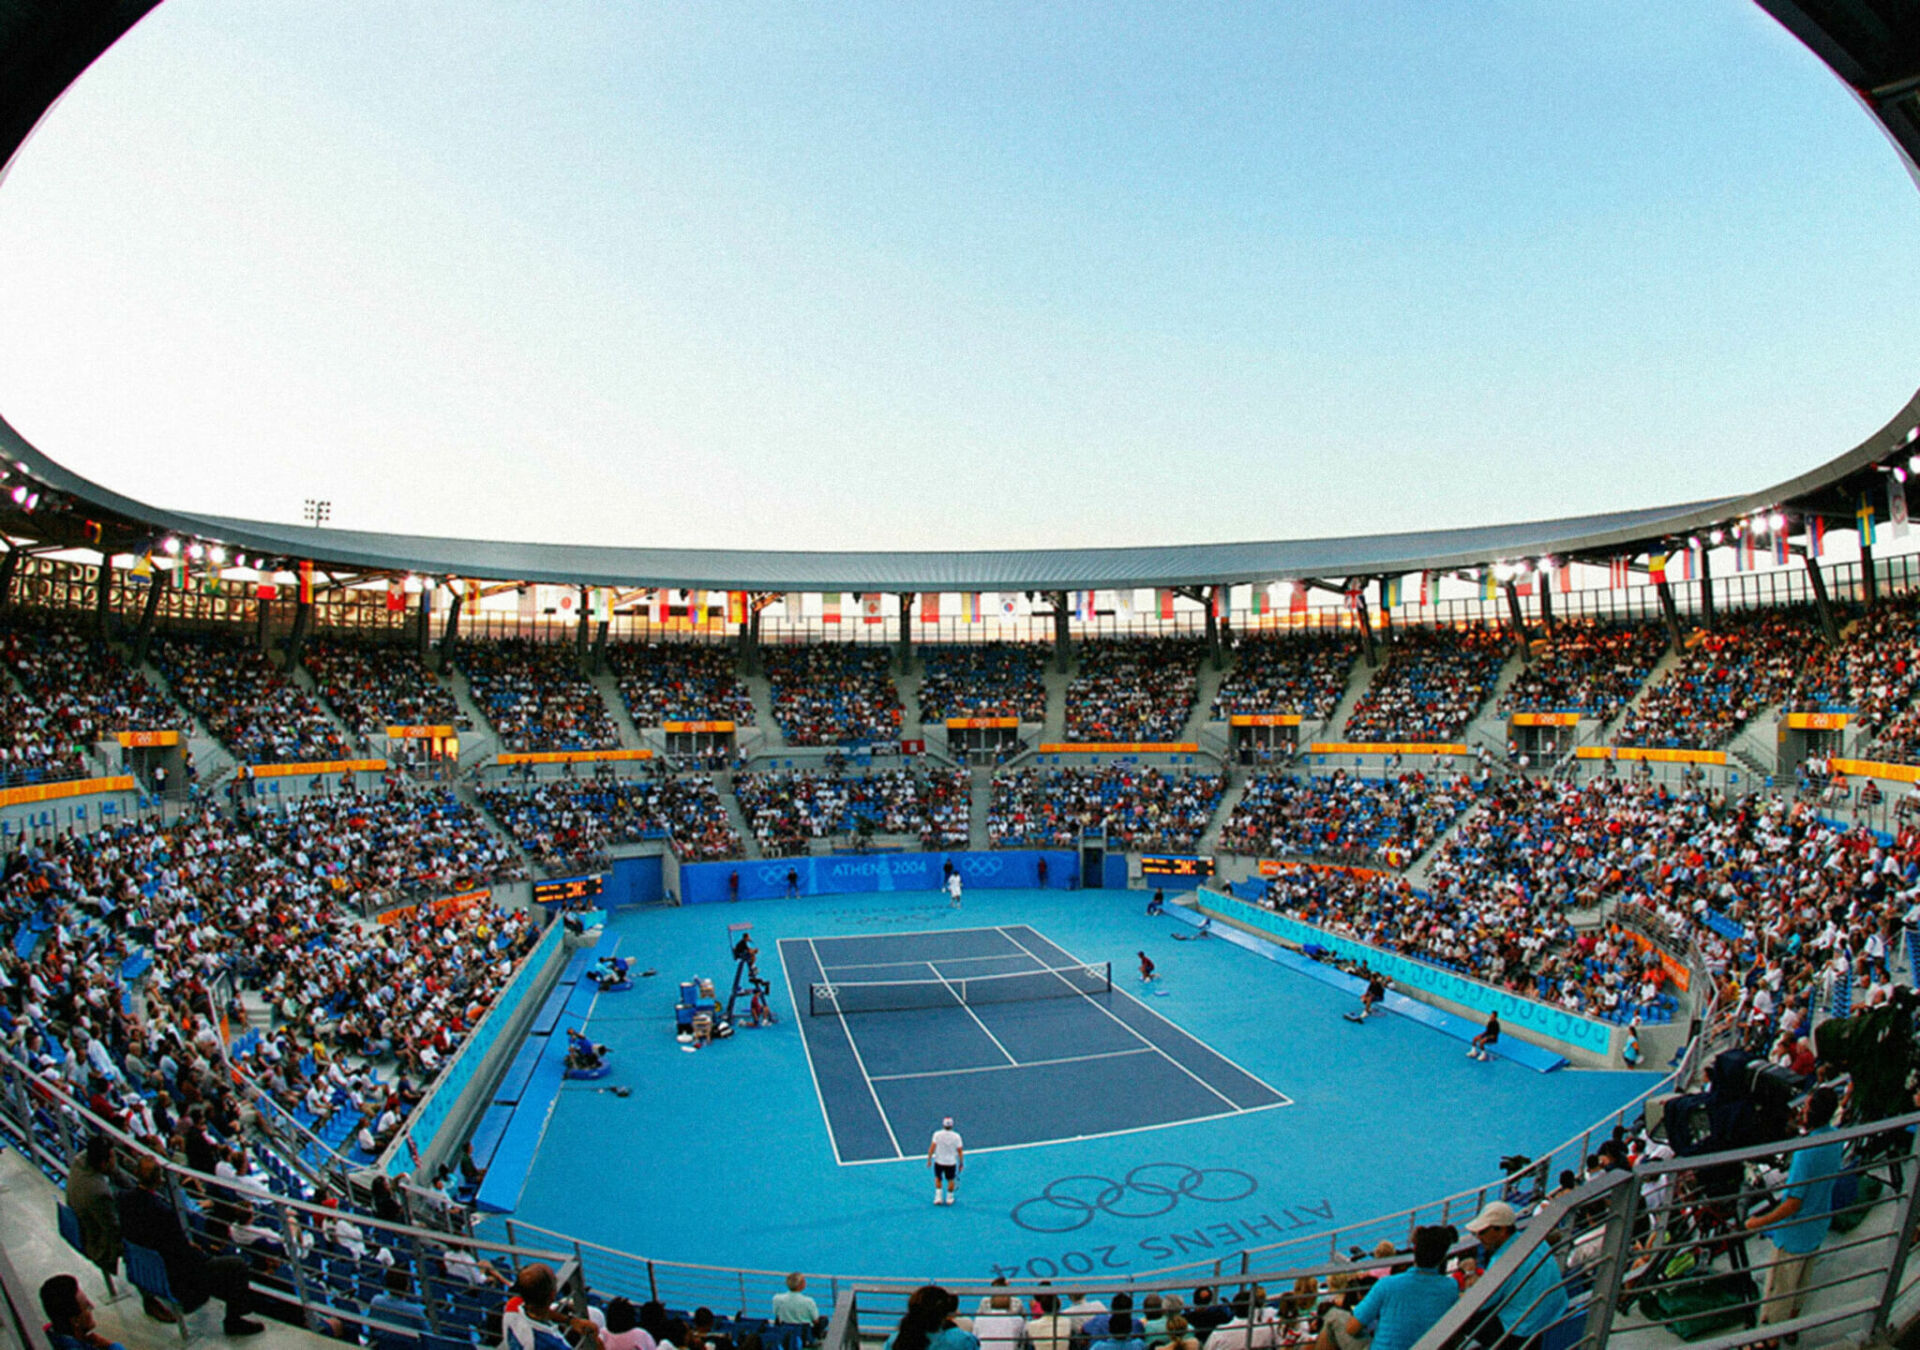 Athens Olympic Tennis Center image 7